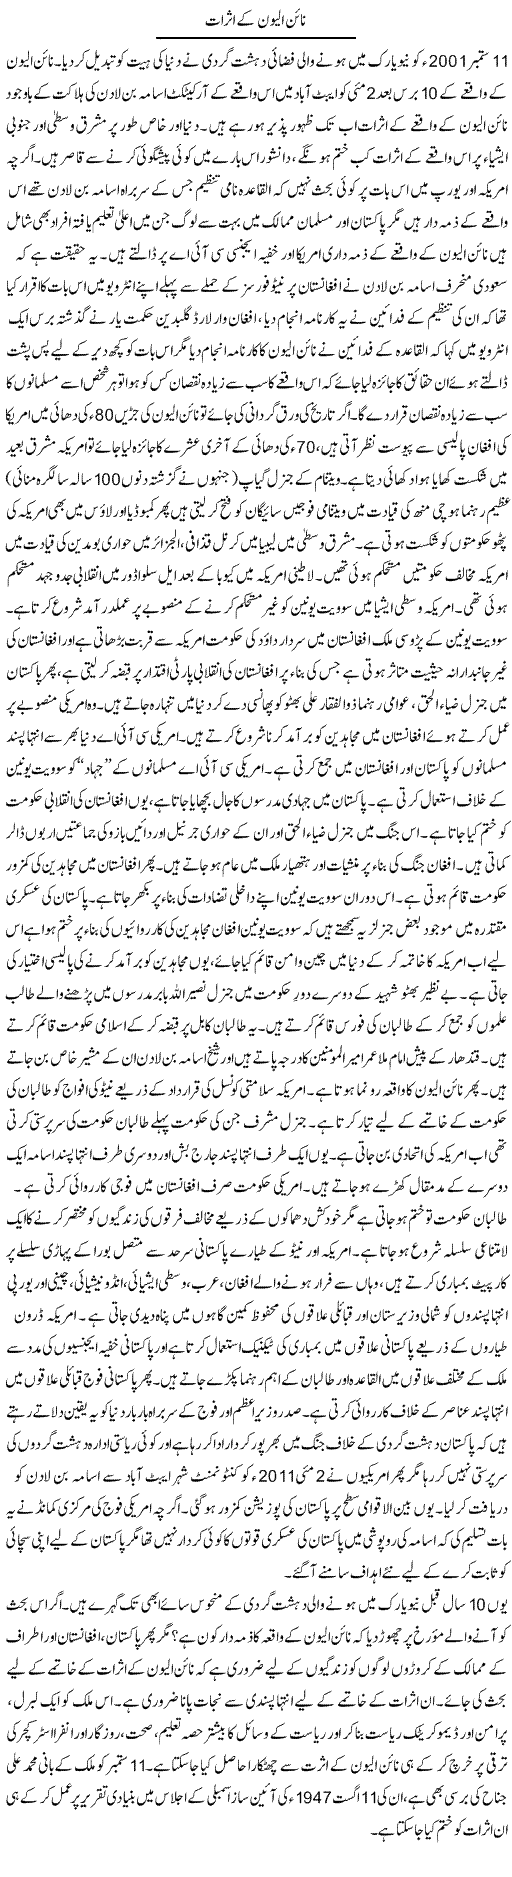 Effect of 9/11 Express Column Tauseef Ahmed 10 September 2011